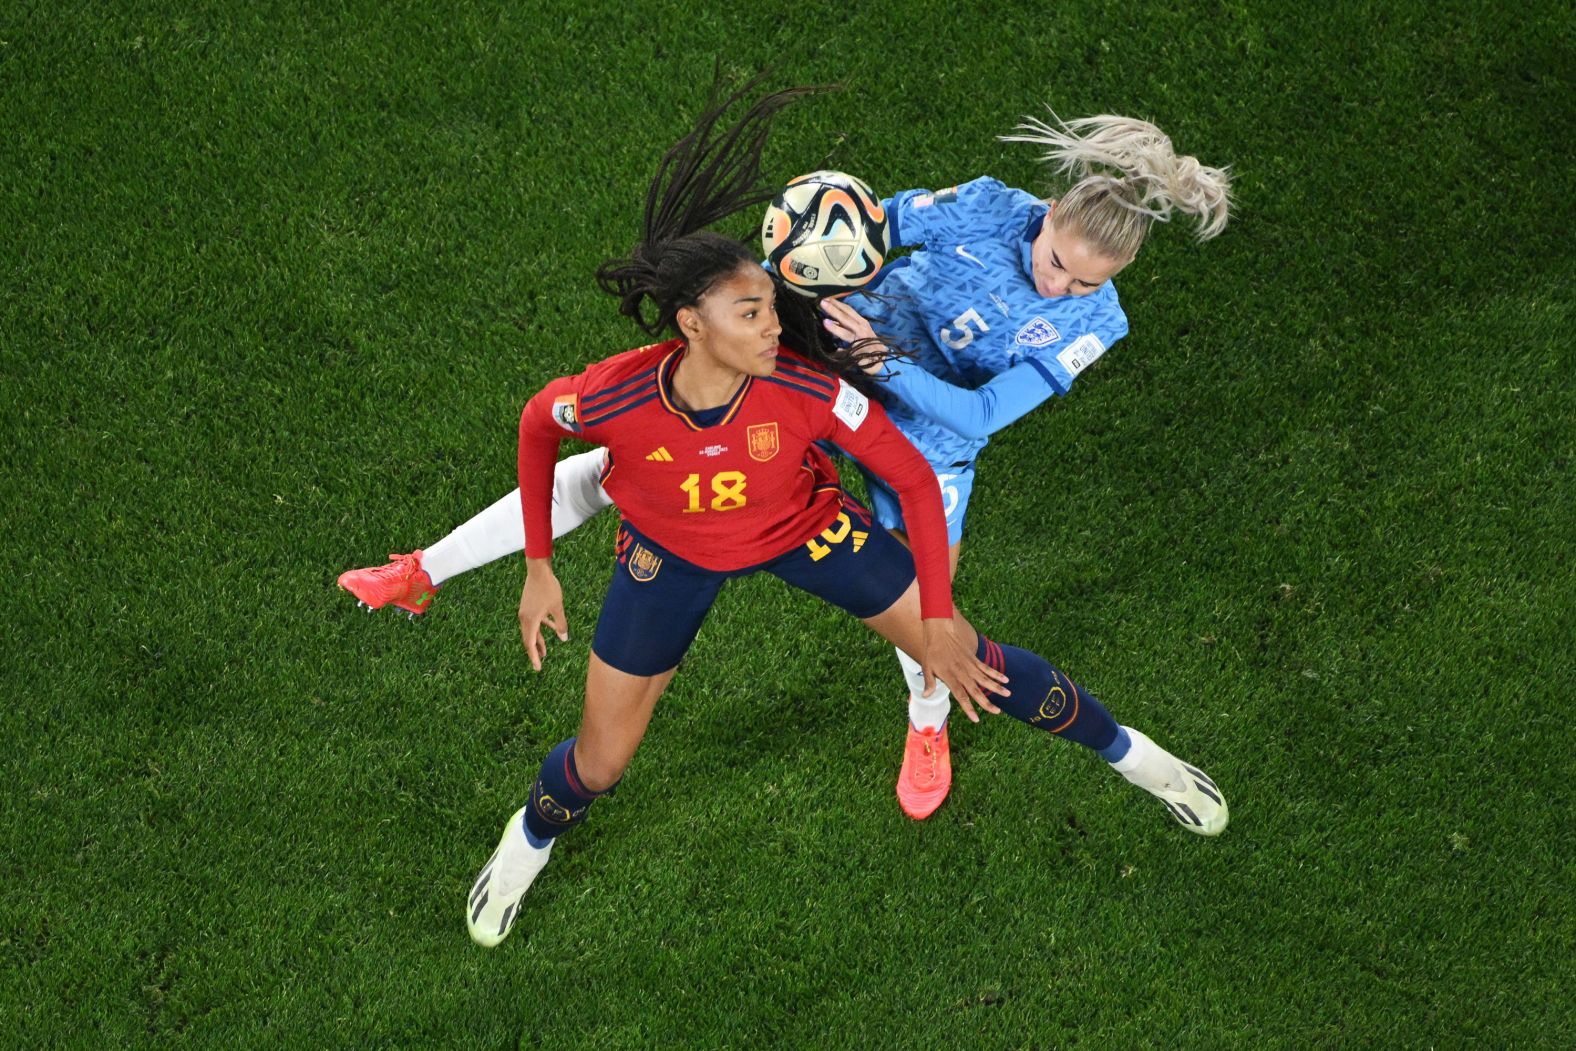 Paralluelo, left, competes for the ball with Greenwood.